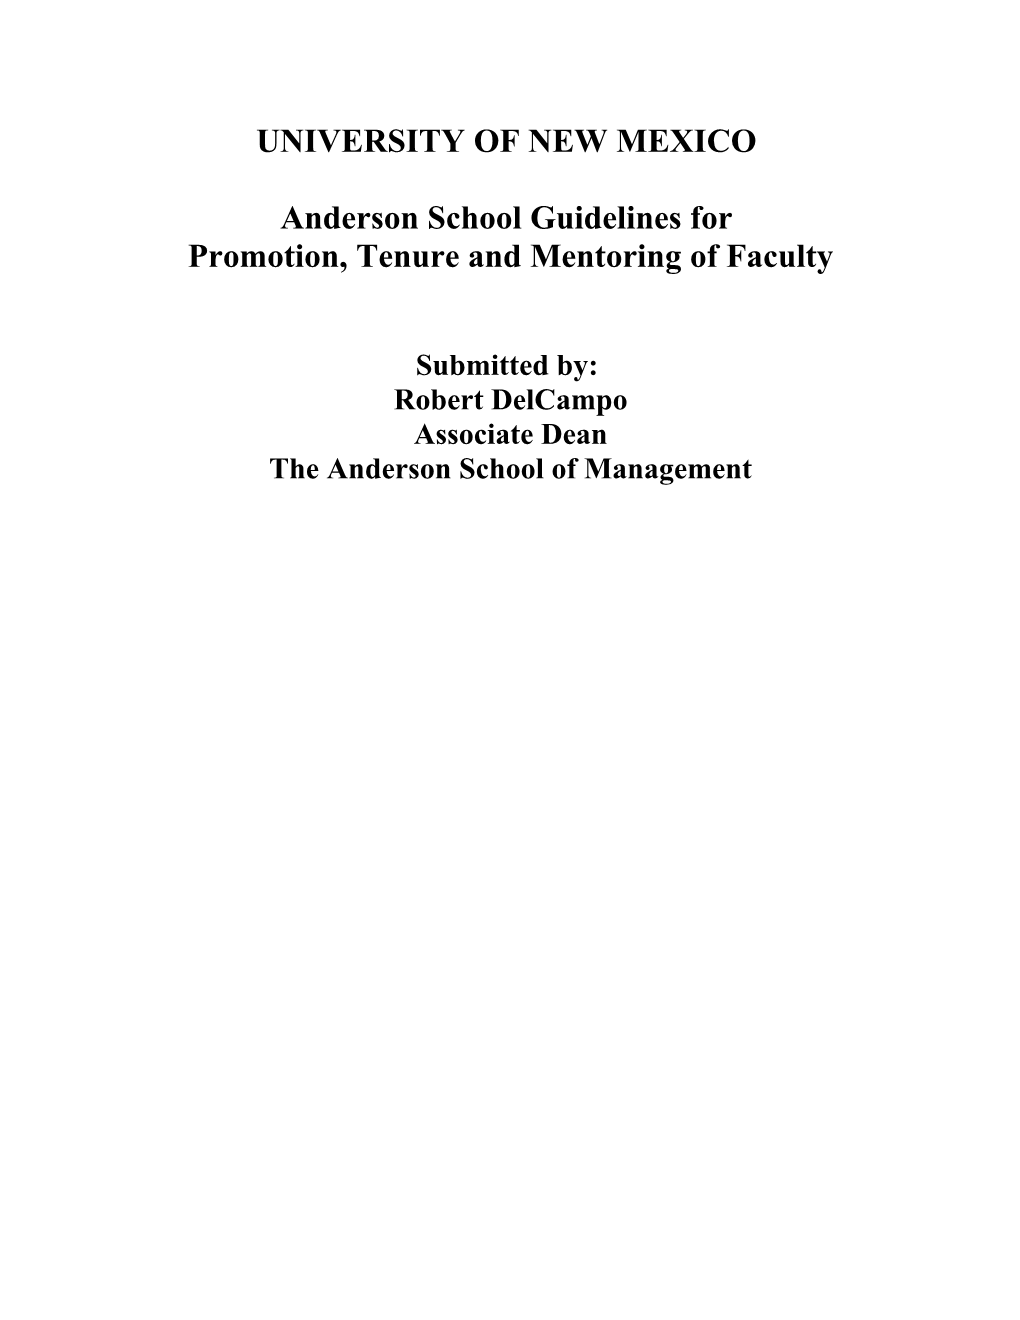 Anderson School Guidelines For